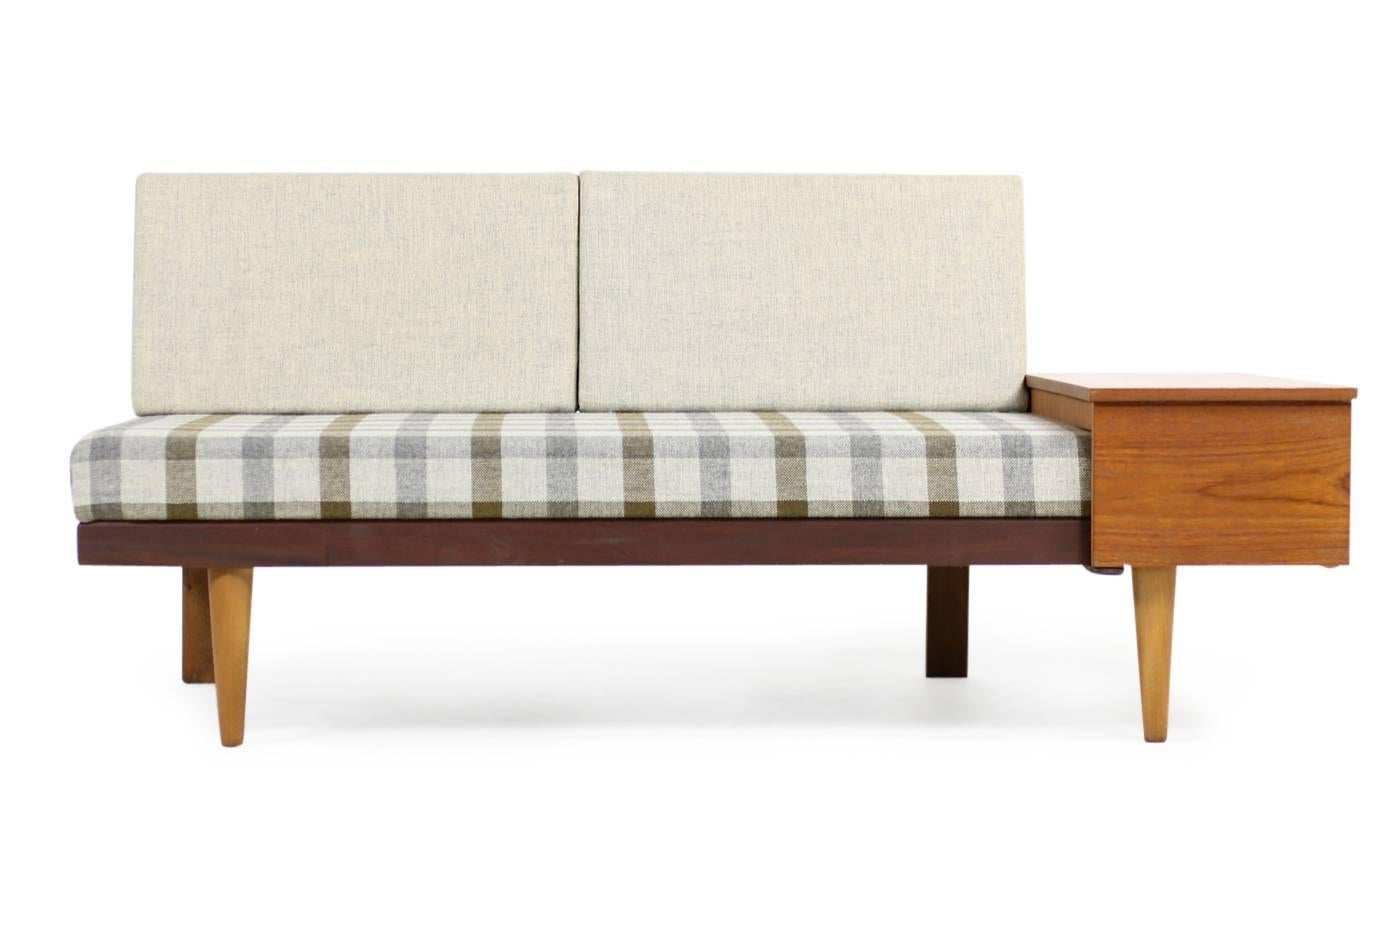 Beautiful Norwegian mid-century modern daybed from the 1950s in fantastic authentic condition. Teak and beech base in great condition, also possible using it as a daybed, the side table can be extended.

Sofa dimensions: W x D x H 161